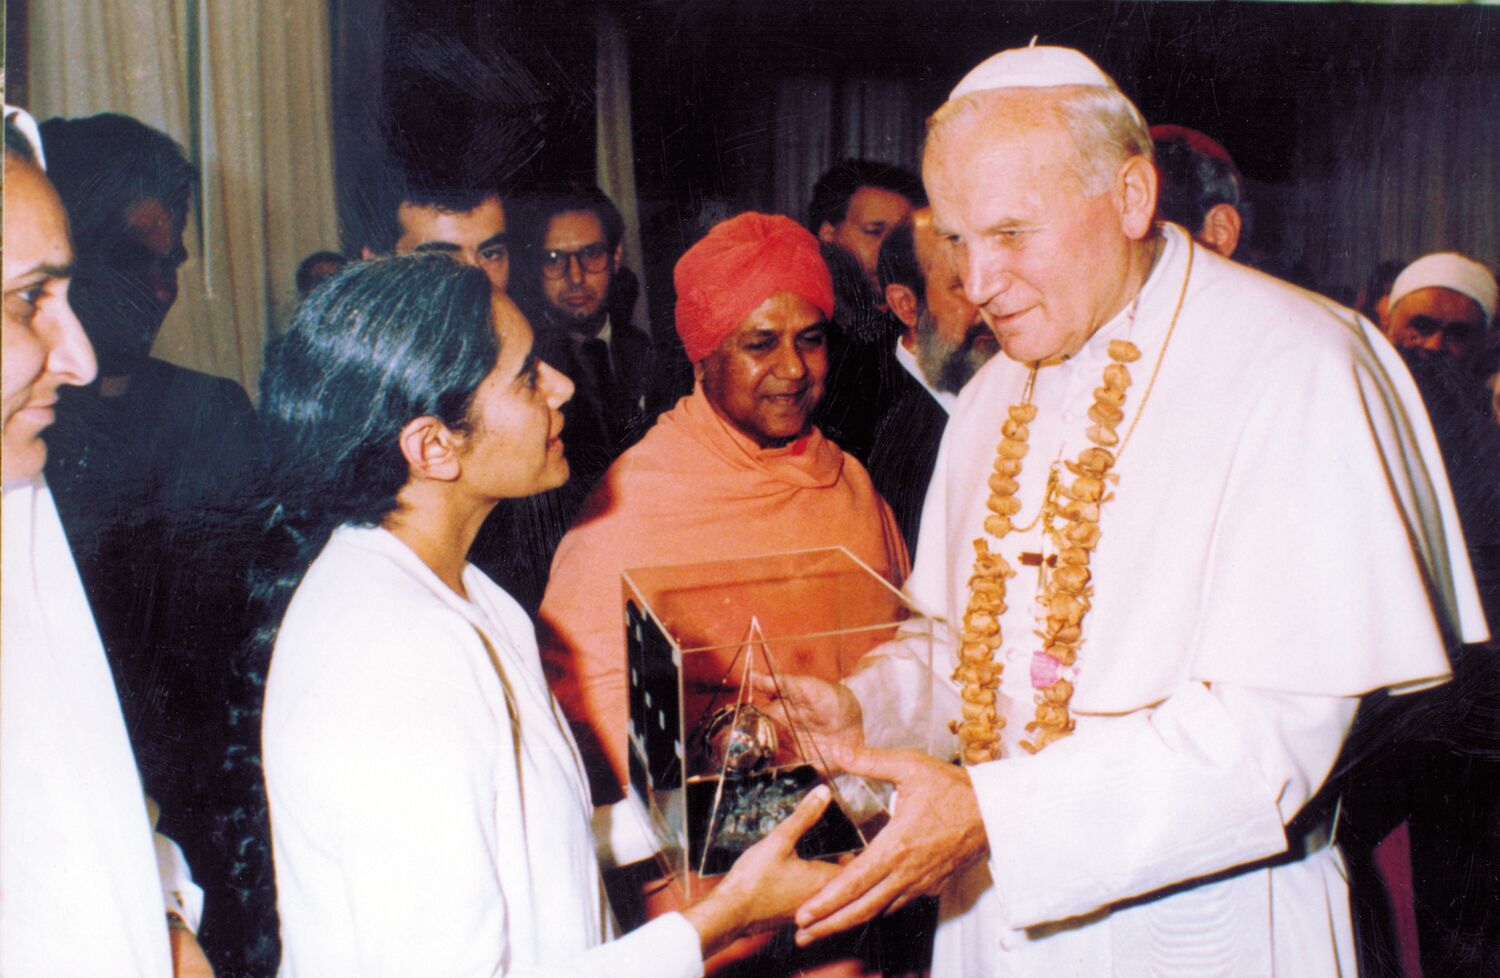 Interfaith event at the Vatican, Rome. Sister Jayanti presented Pope John Paul II a gift from the Brahma Kumaris which came from the Community of Saint Egidio in Poland. It was a sculpture that depicted rays of light over the globe. 1987